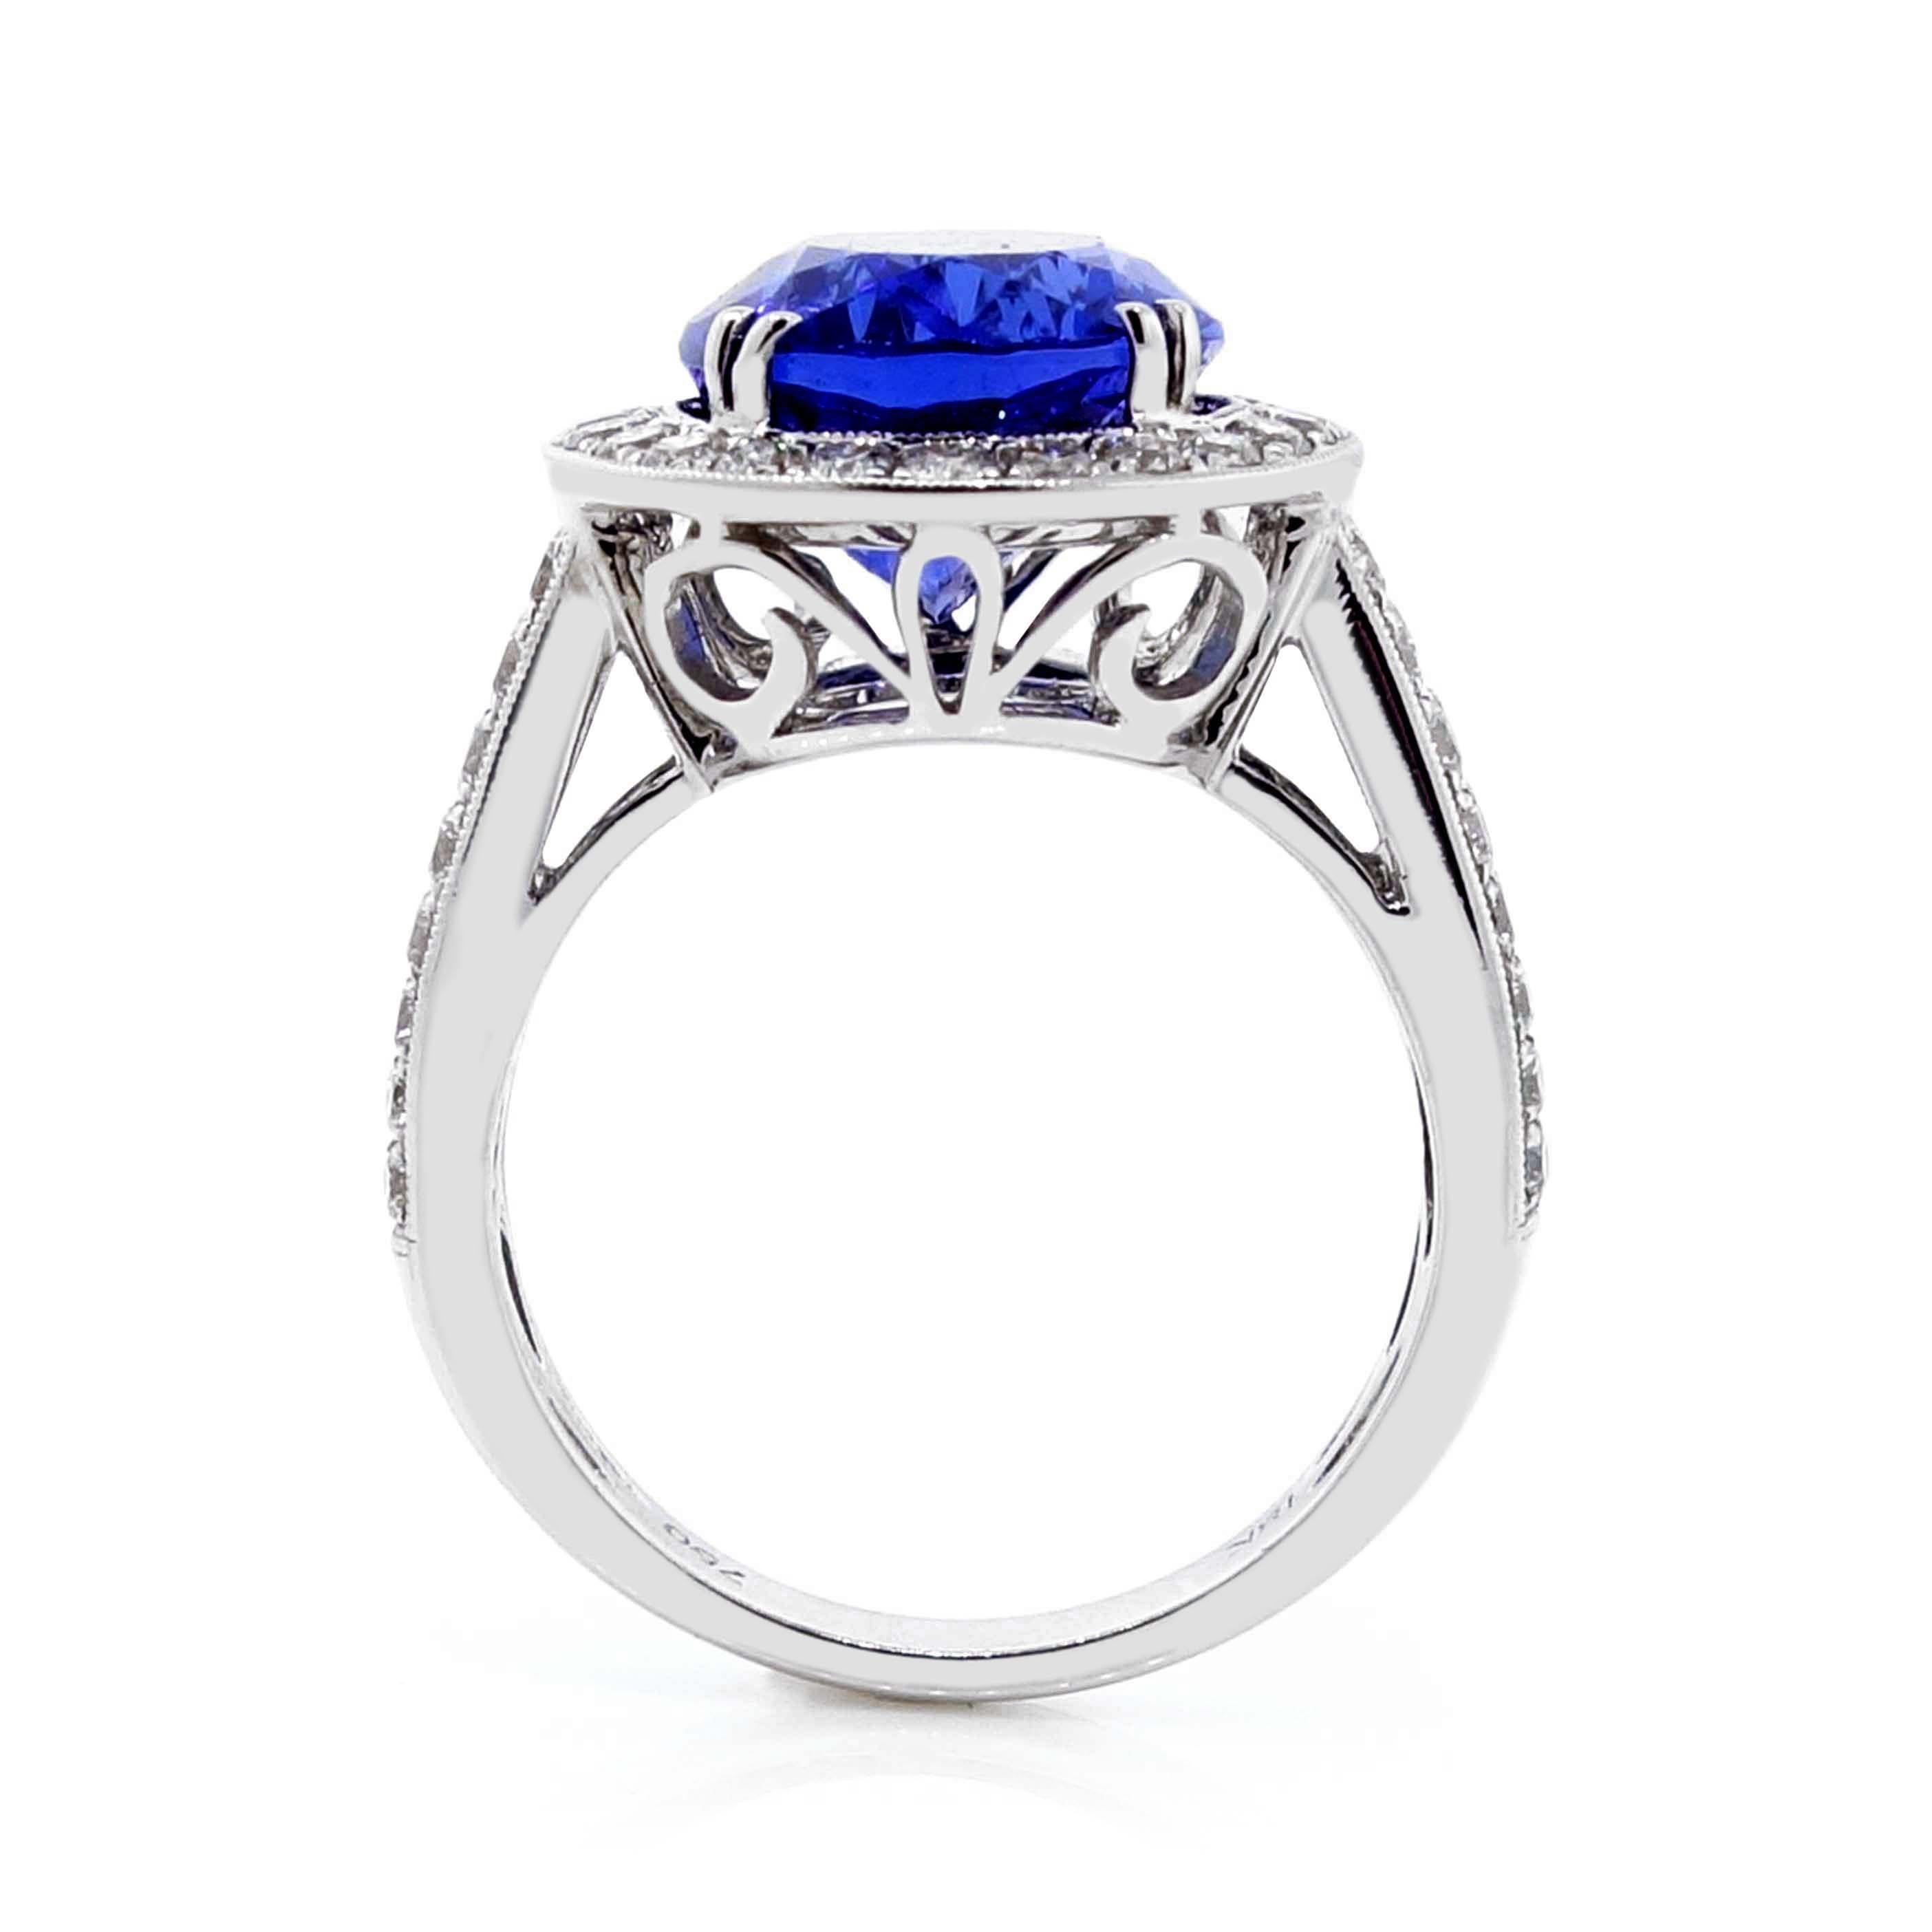 5.65 Carat Oval Tanzanite Ring in 18k White Gold In New Condition For Sale In Houston, TX